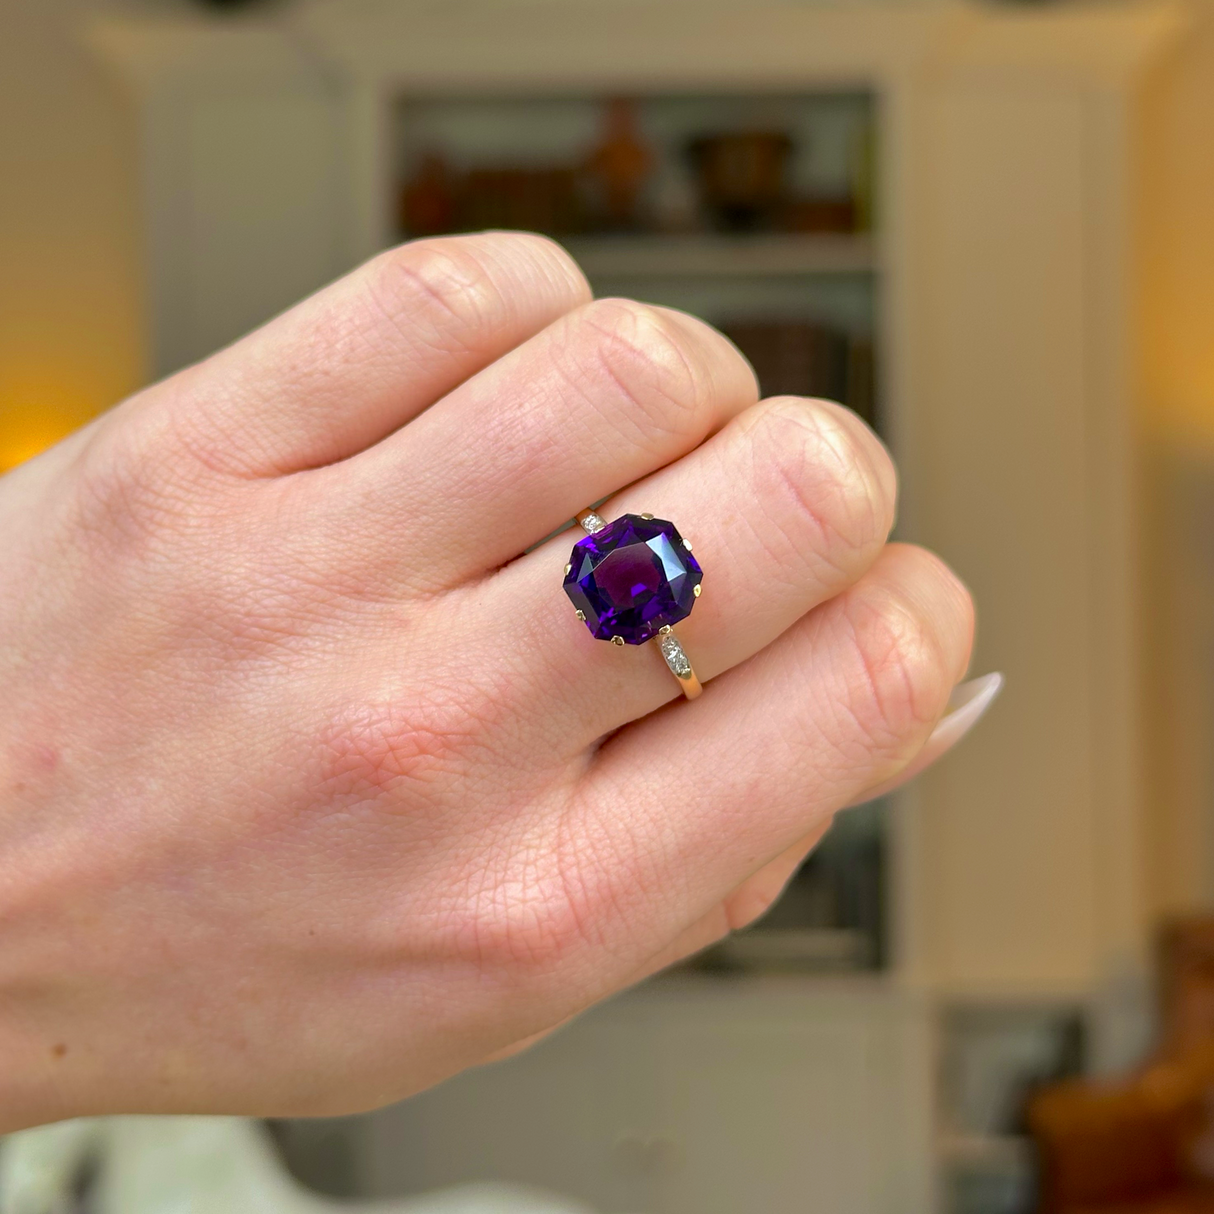 Antique, Edwardian Single stone Amethyst Ring, 18ct Yellow Gold and Platinum worn on closed hand.